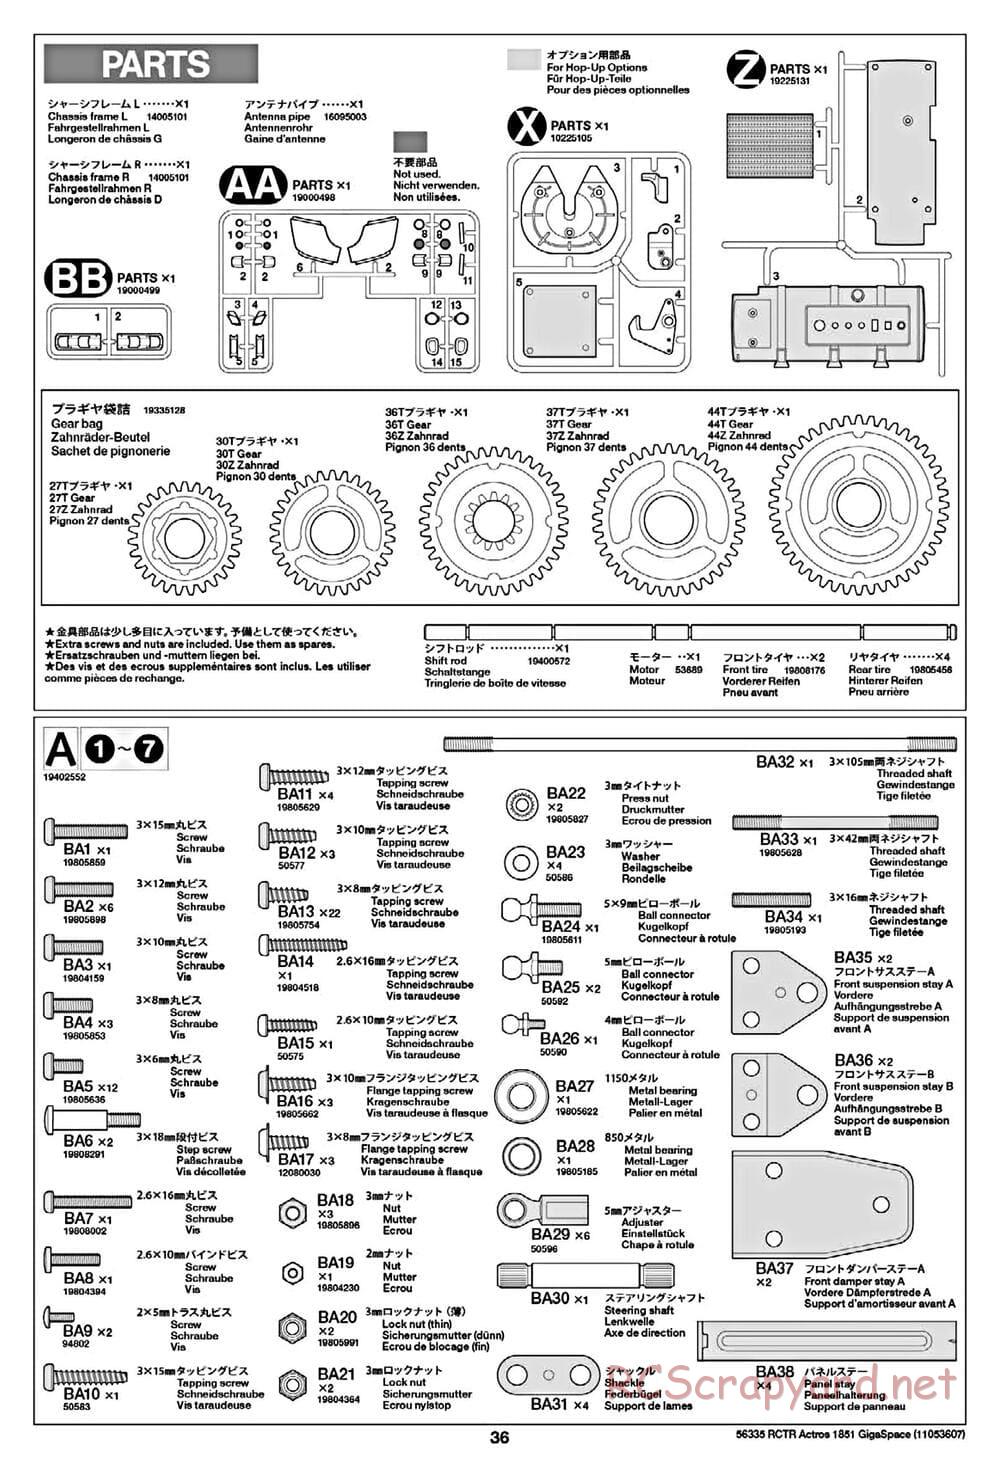 Tamiya - Mercedes-Benz Actros 1851 Gigaspace Tractor Truck Chassis - Manual - Page 36